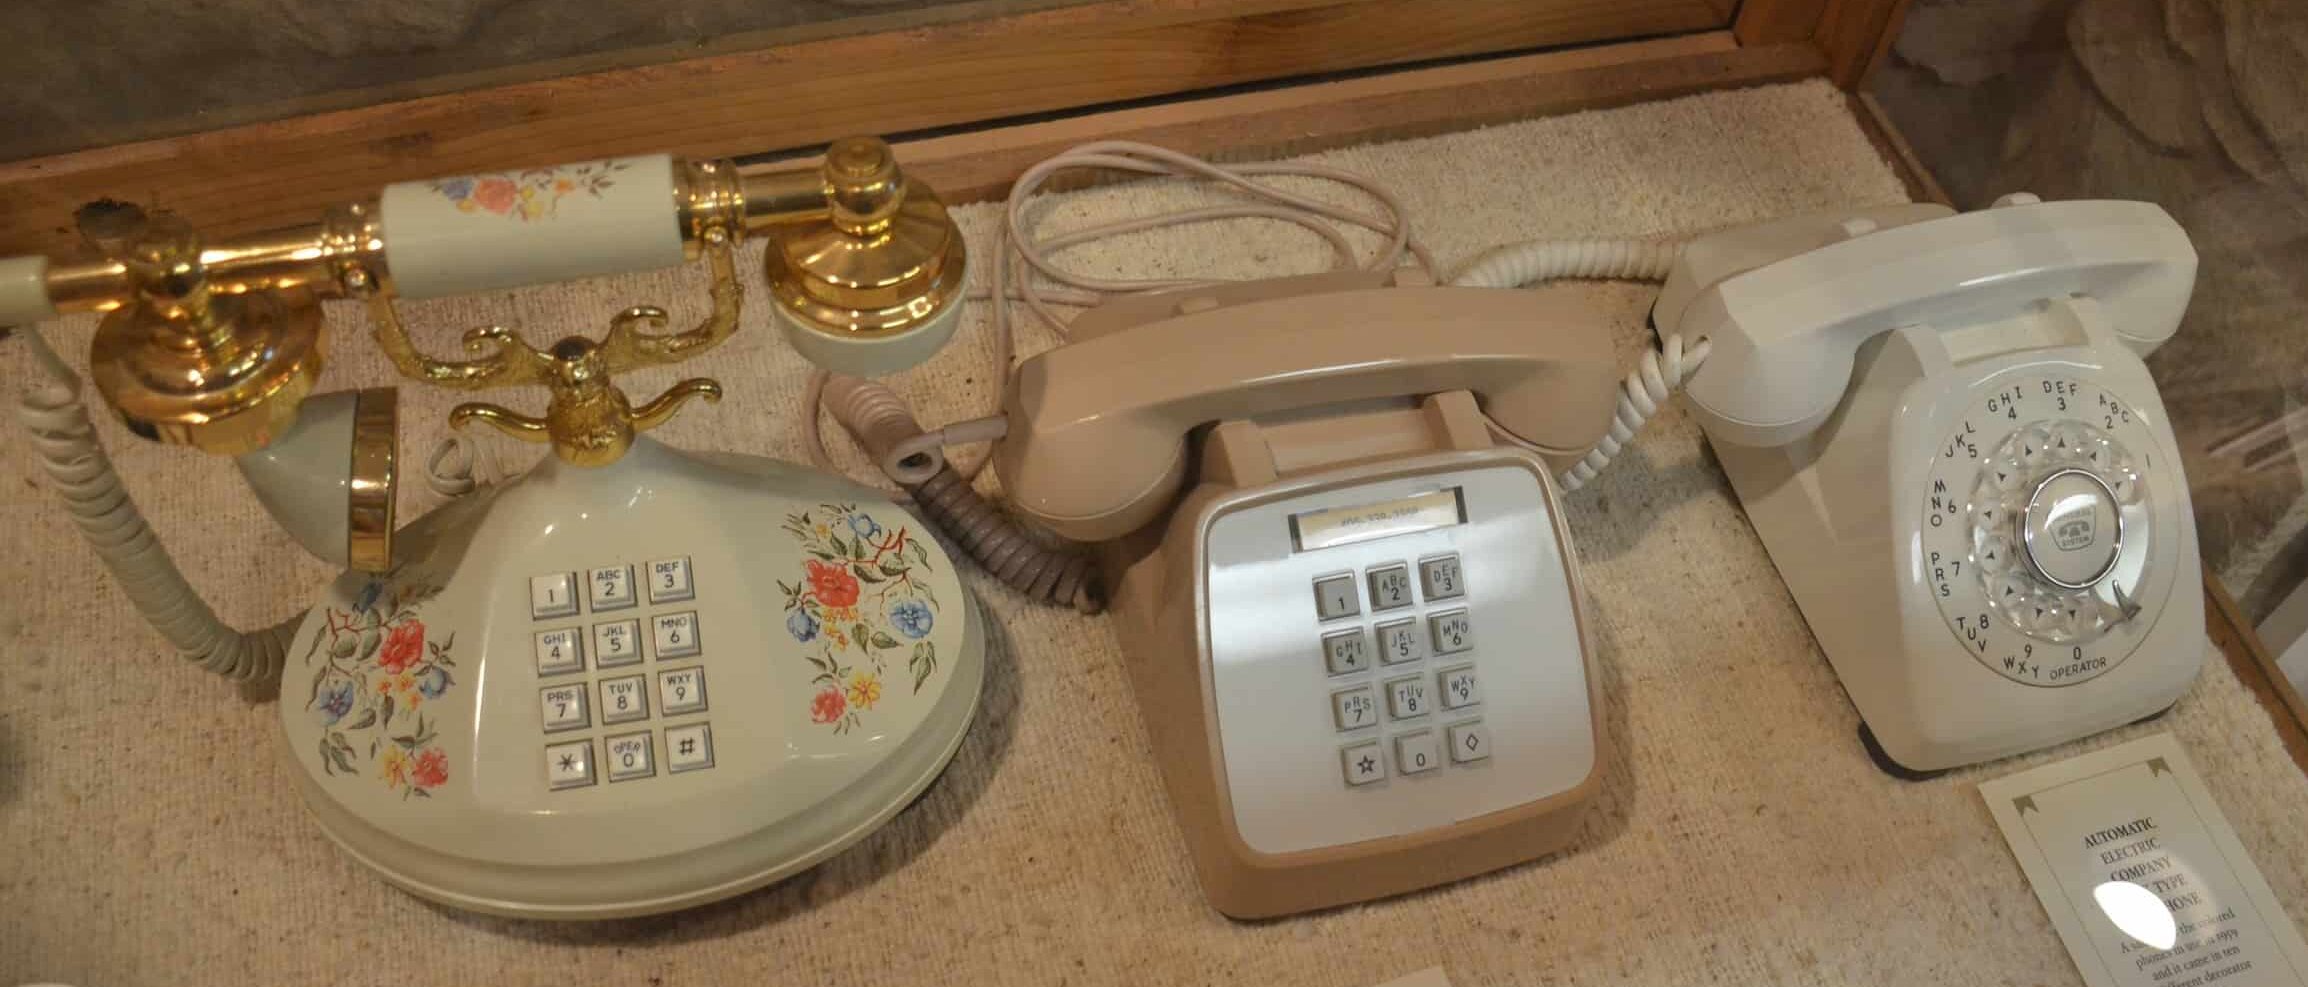 Automatic Electric Company telephones at the E.H. Danner Museum of Telephony